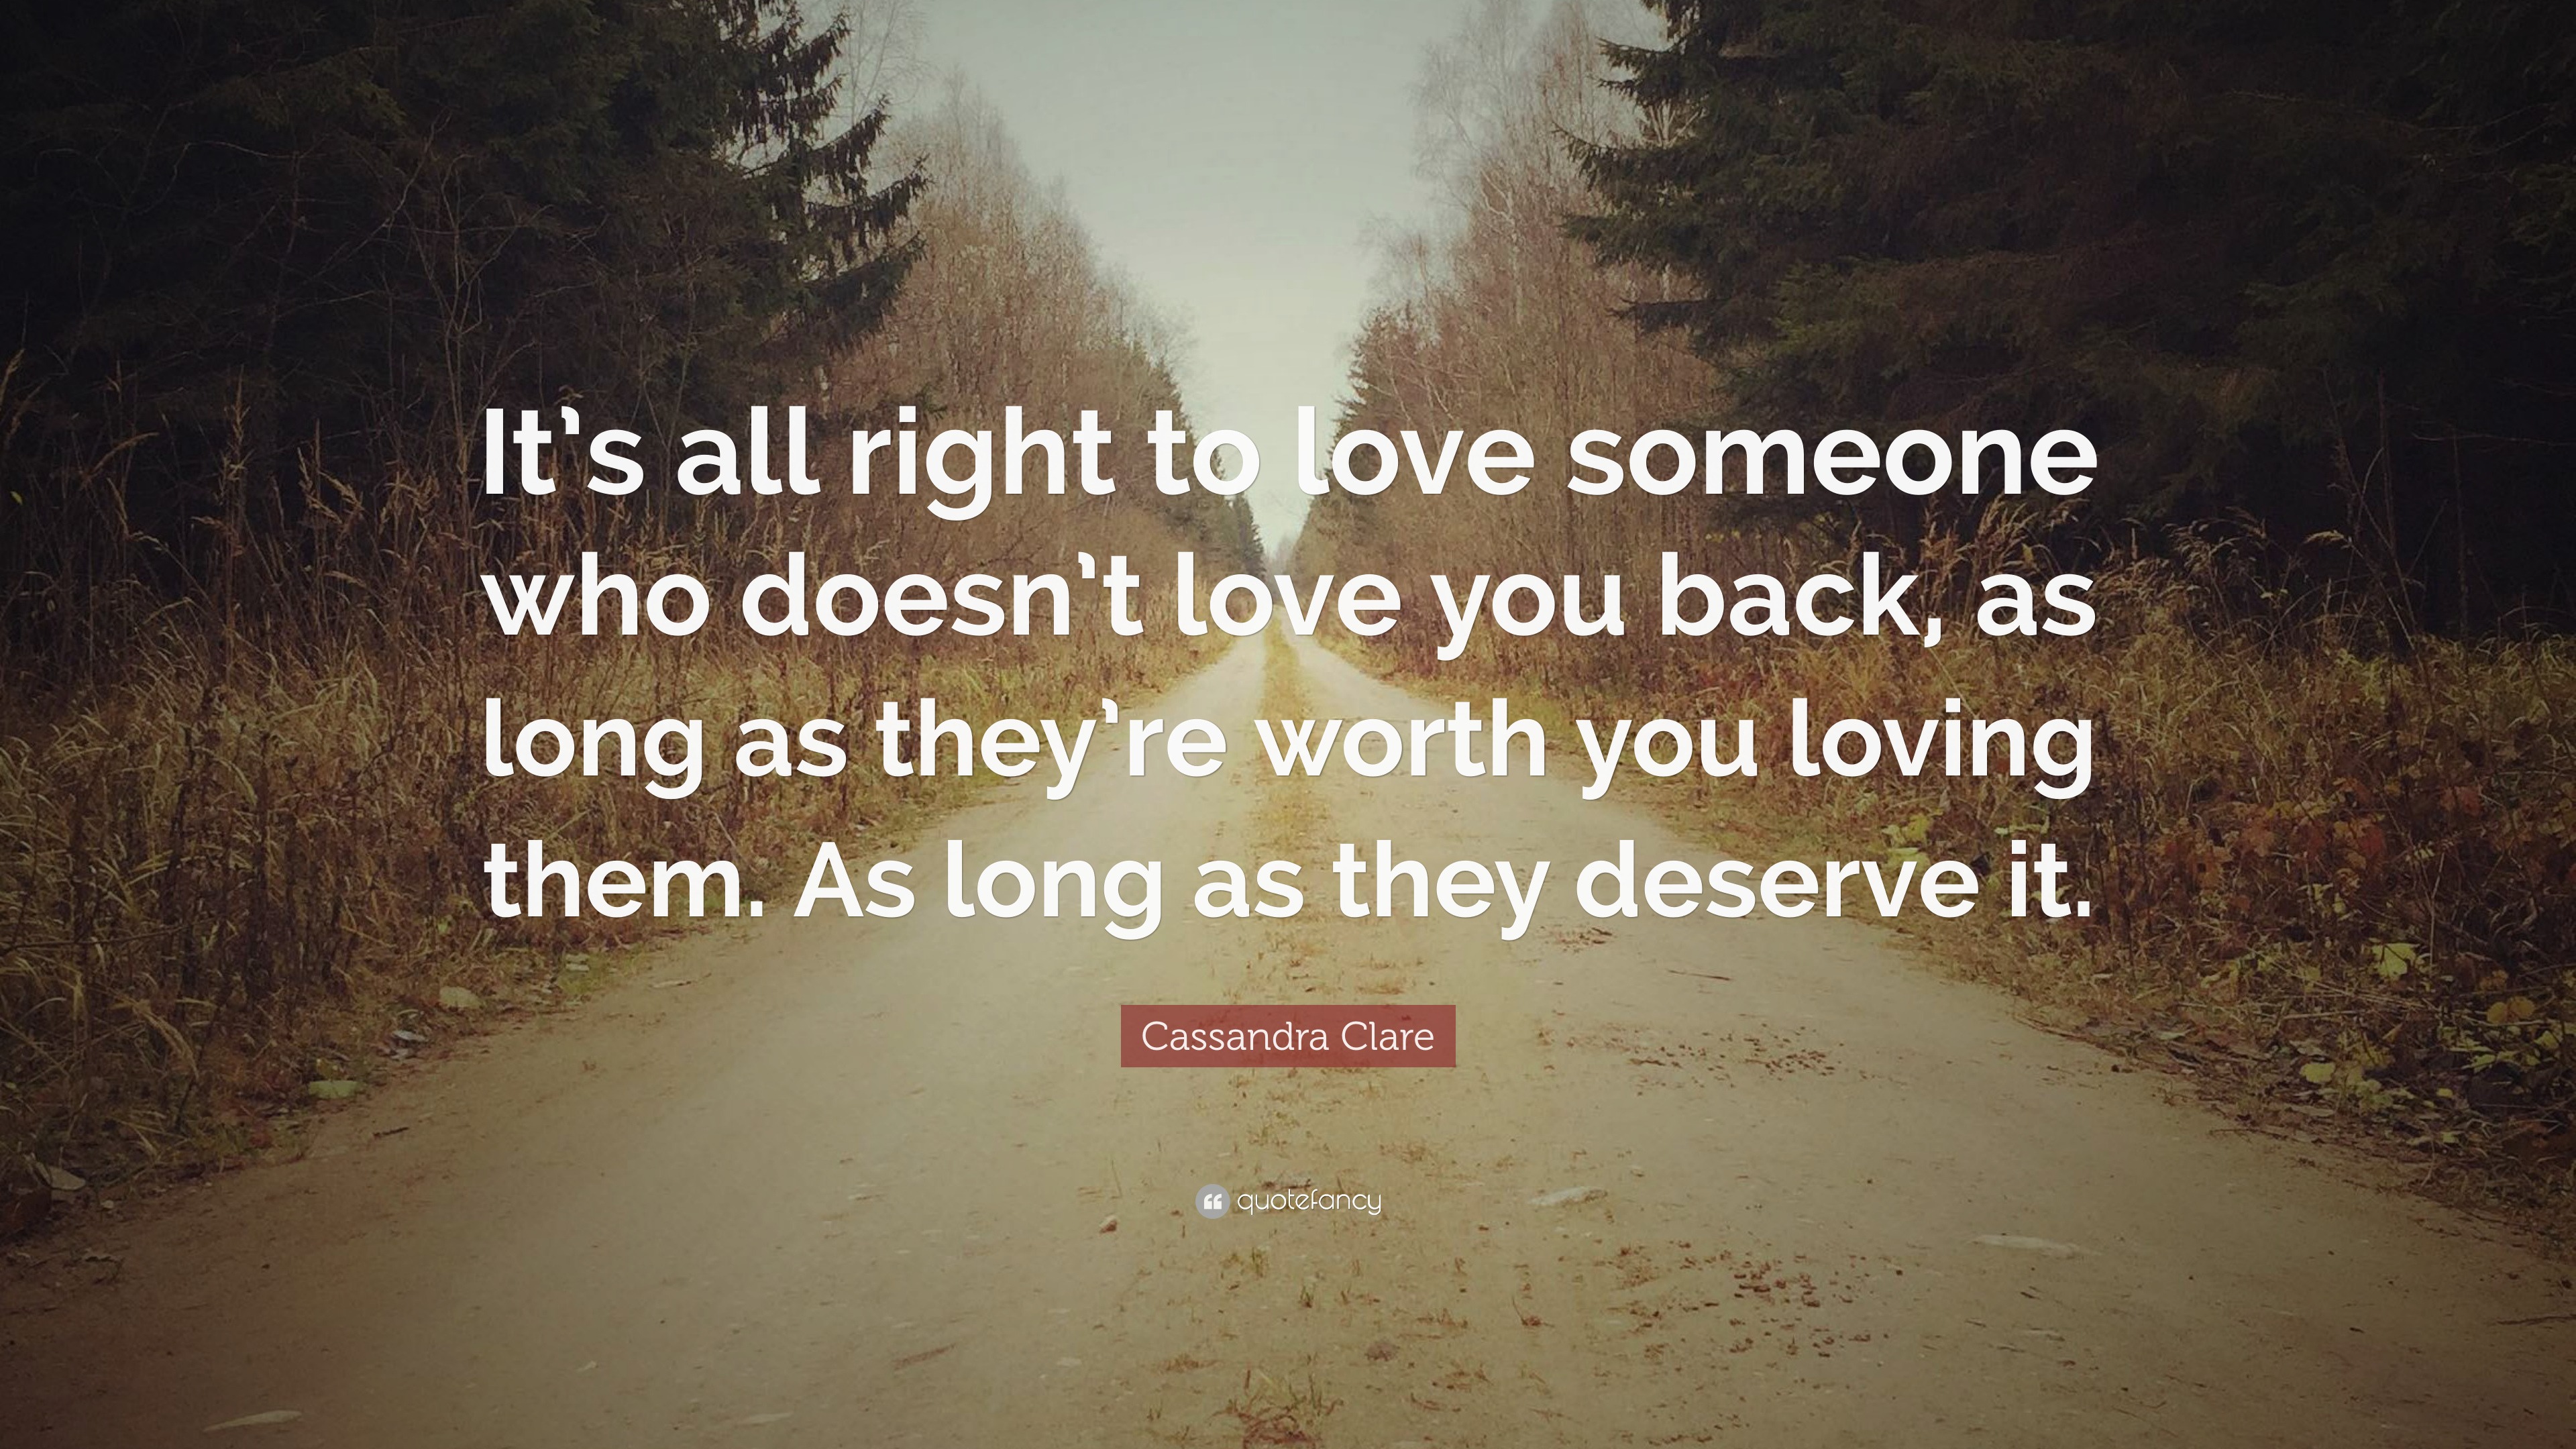 Cassandra Clare Quote: “It’s all right to love someone who doesn’t love